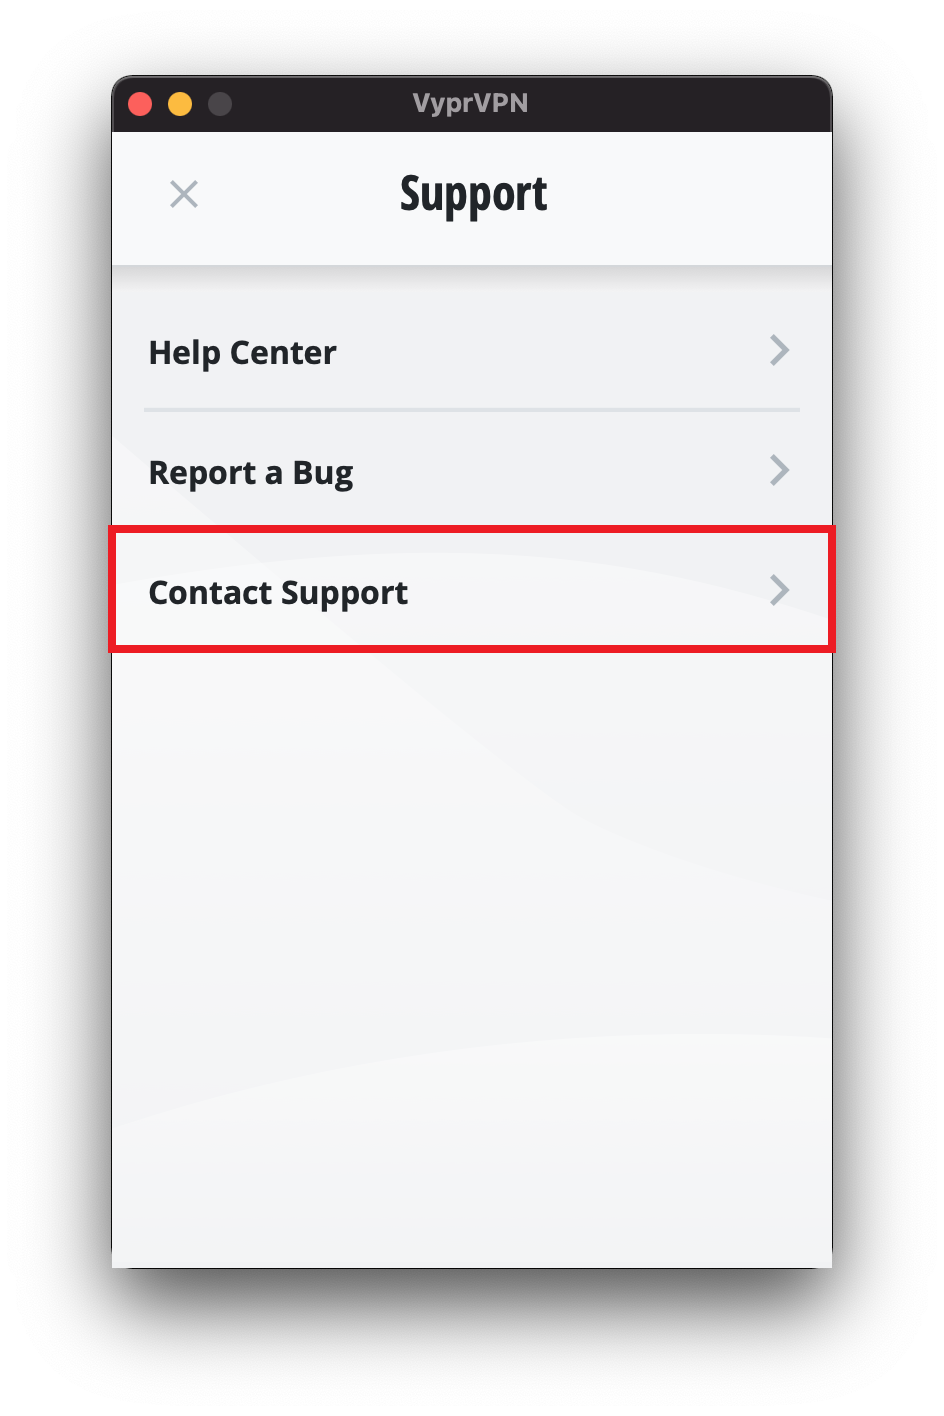 Vypr_App_-_Support_Menu_-_Contact_Support_Selected.png